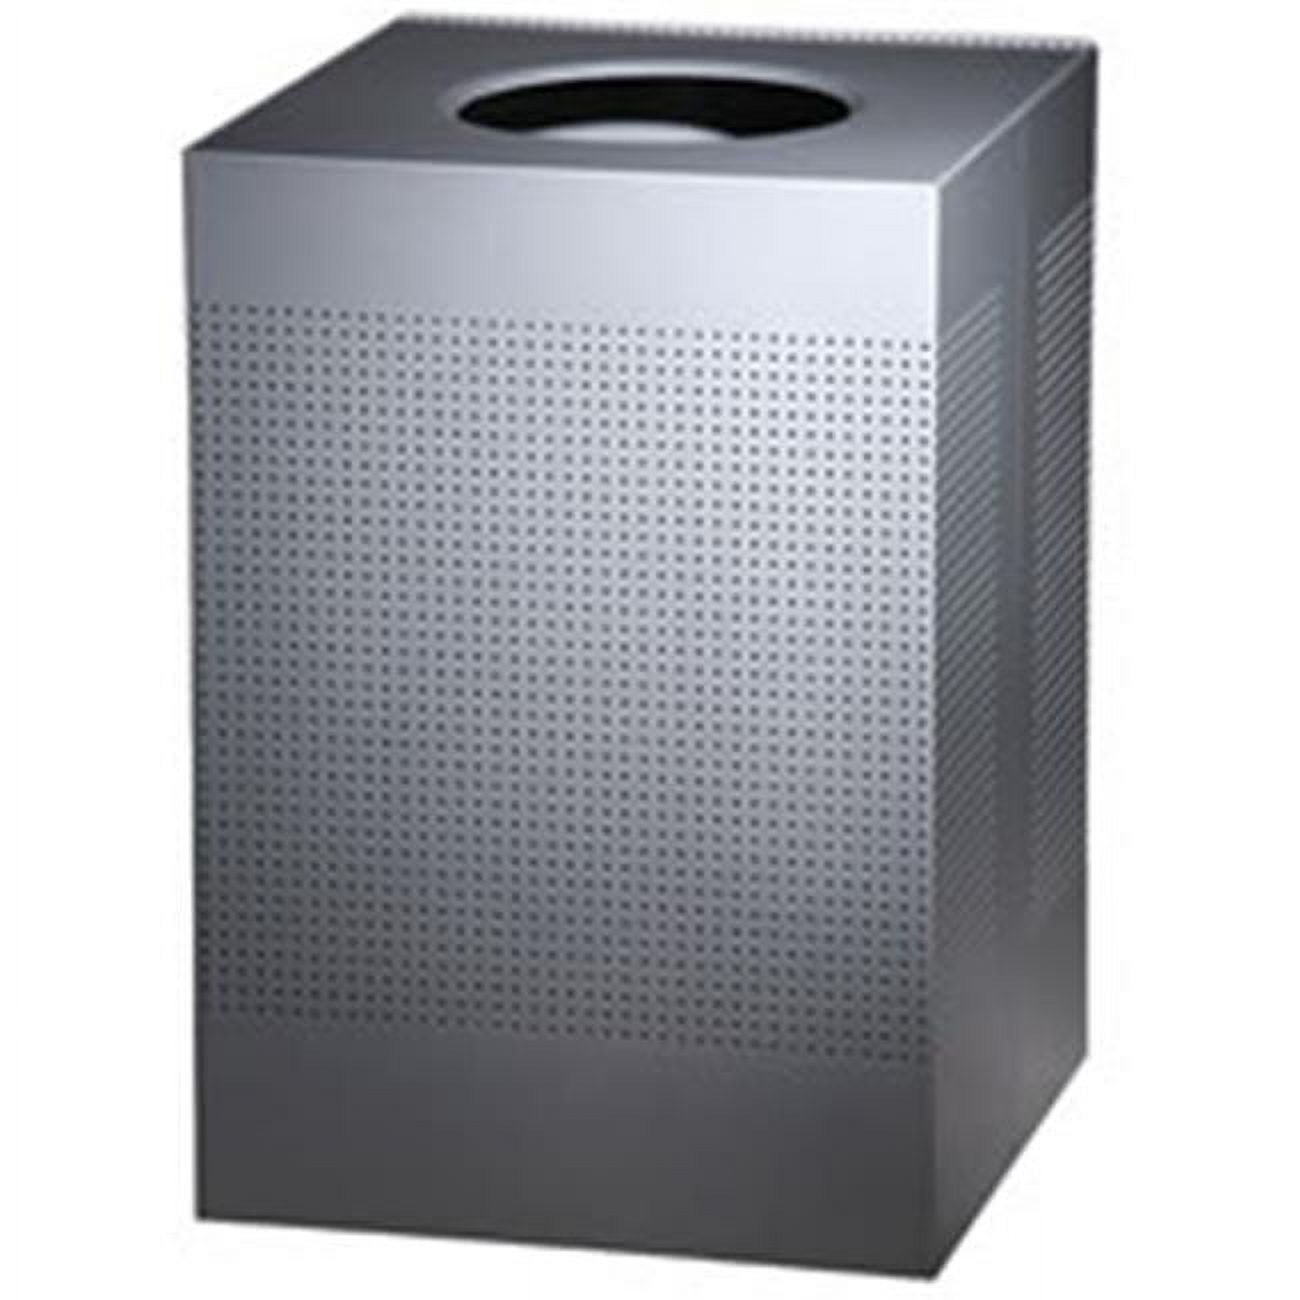 Rubbermaid Commercial Trash Can,Square,40 gal.,Silver FGSC22EPLSM, 1 -  Kroger